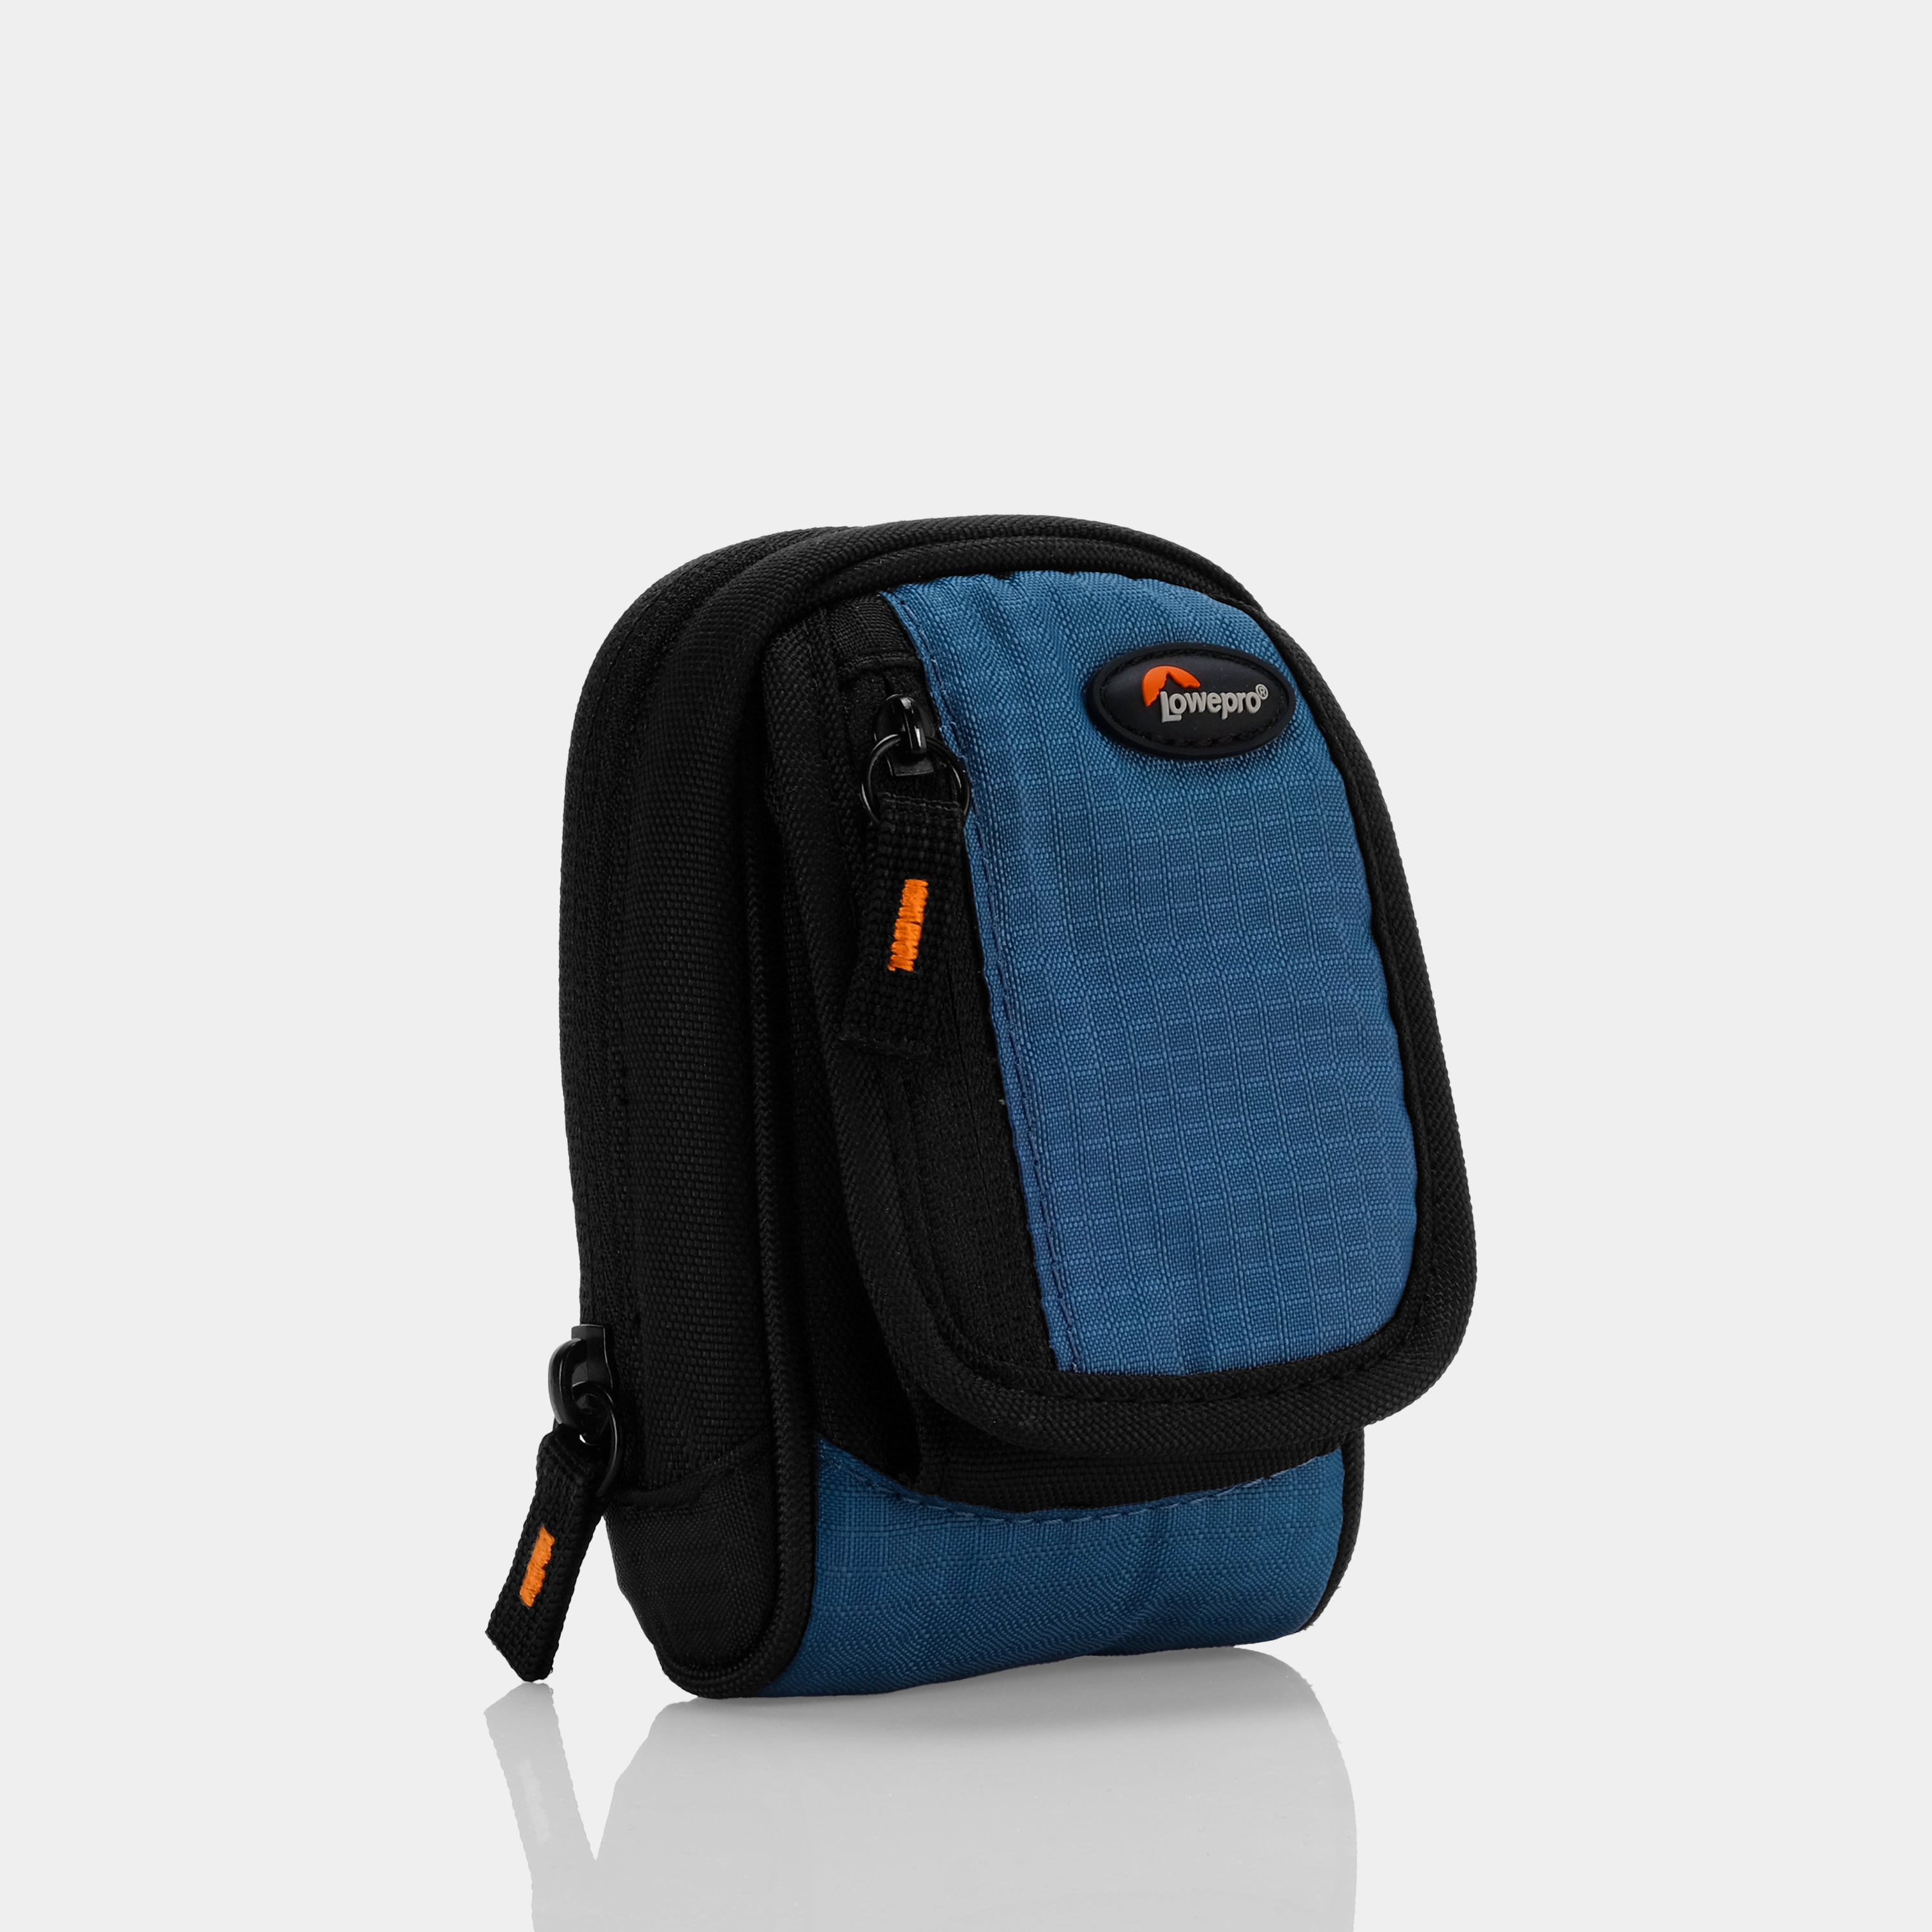 Lowepro Blue Point and Shoot Camera Case